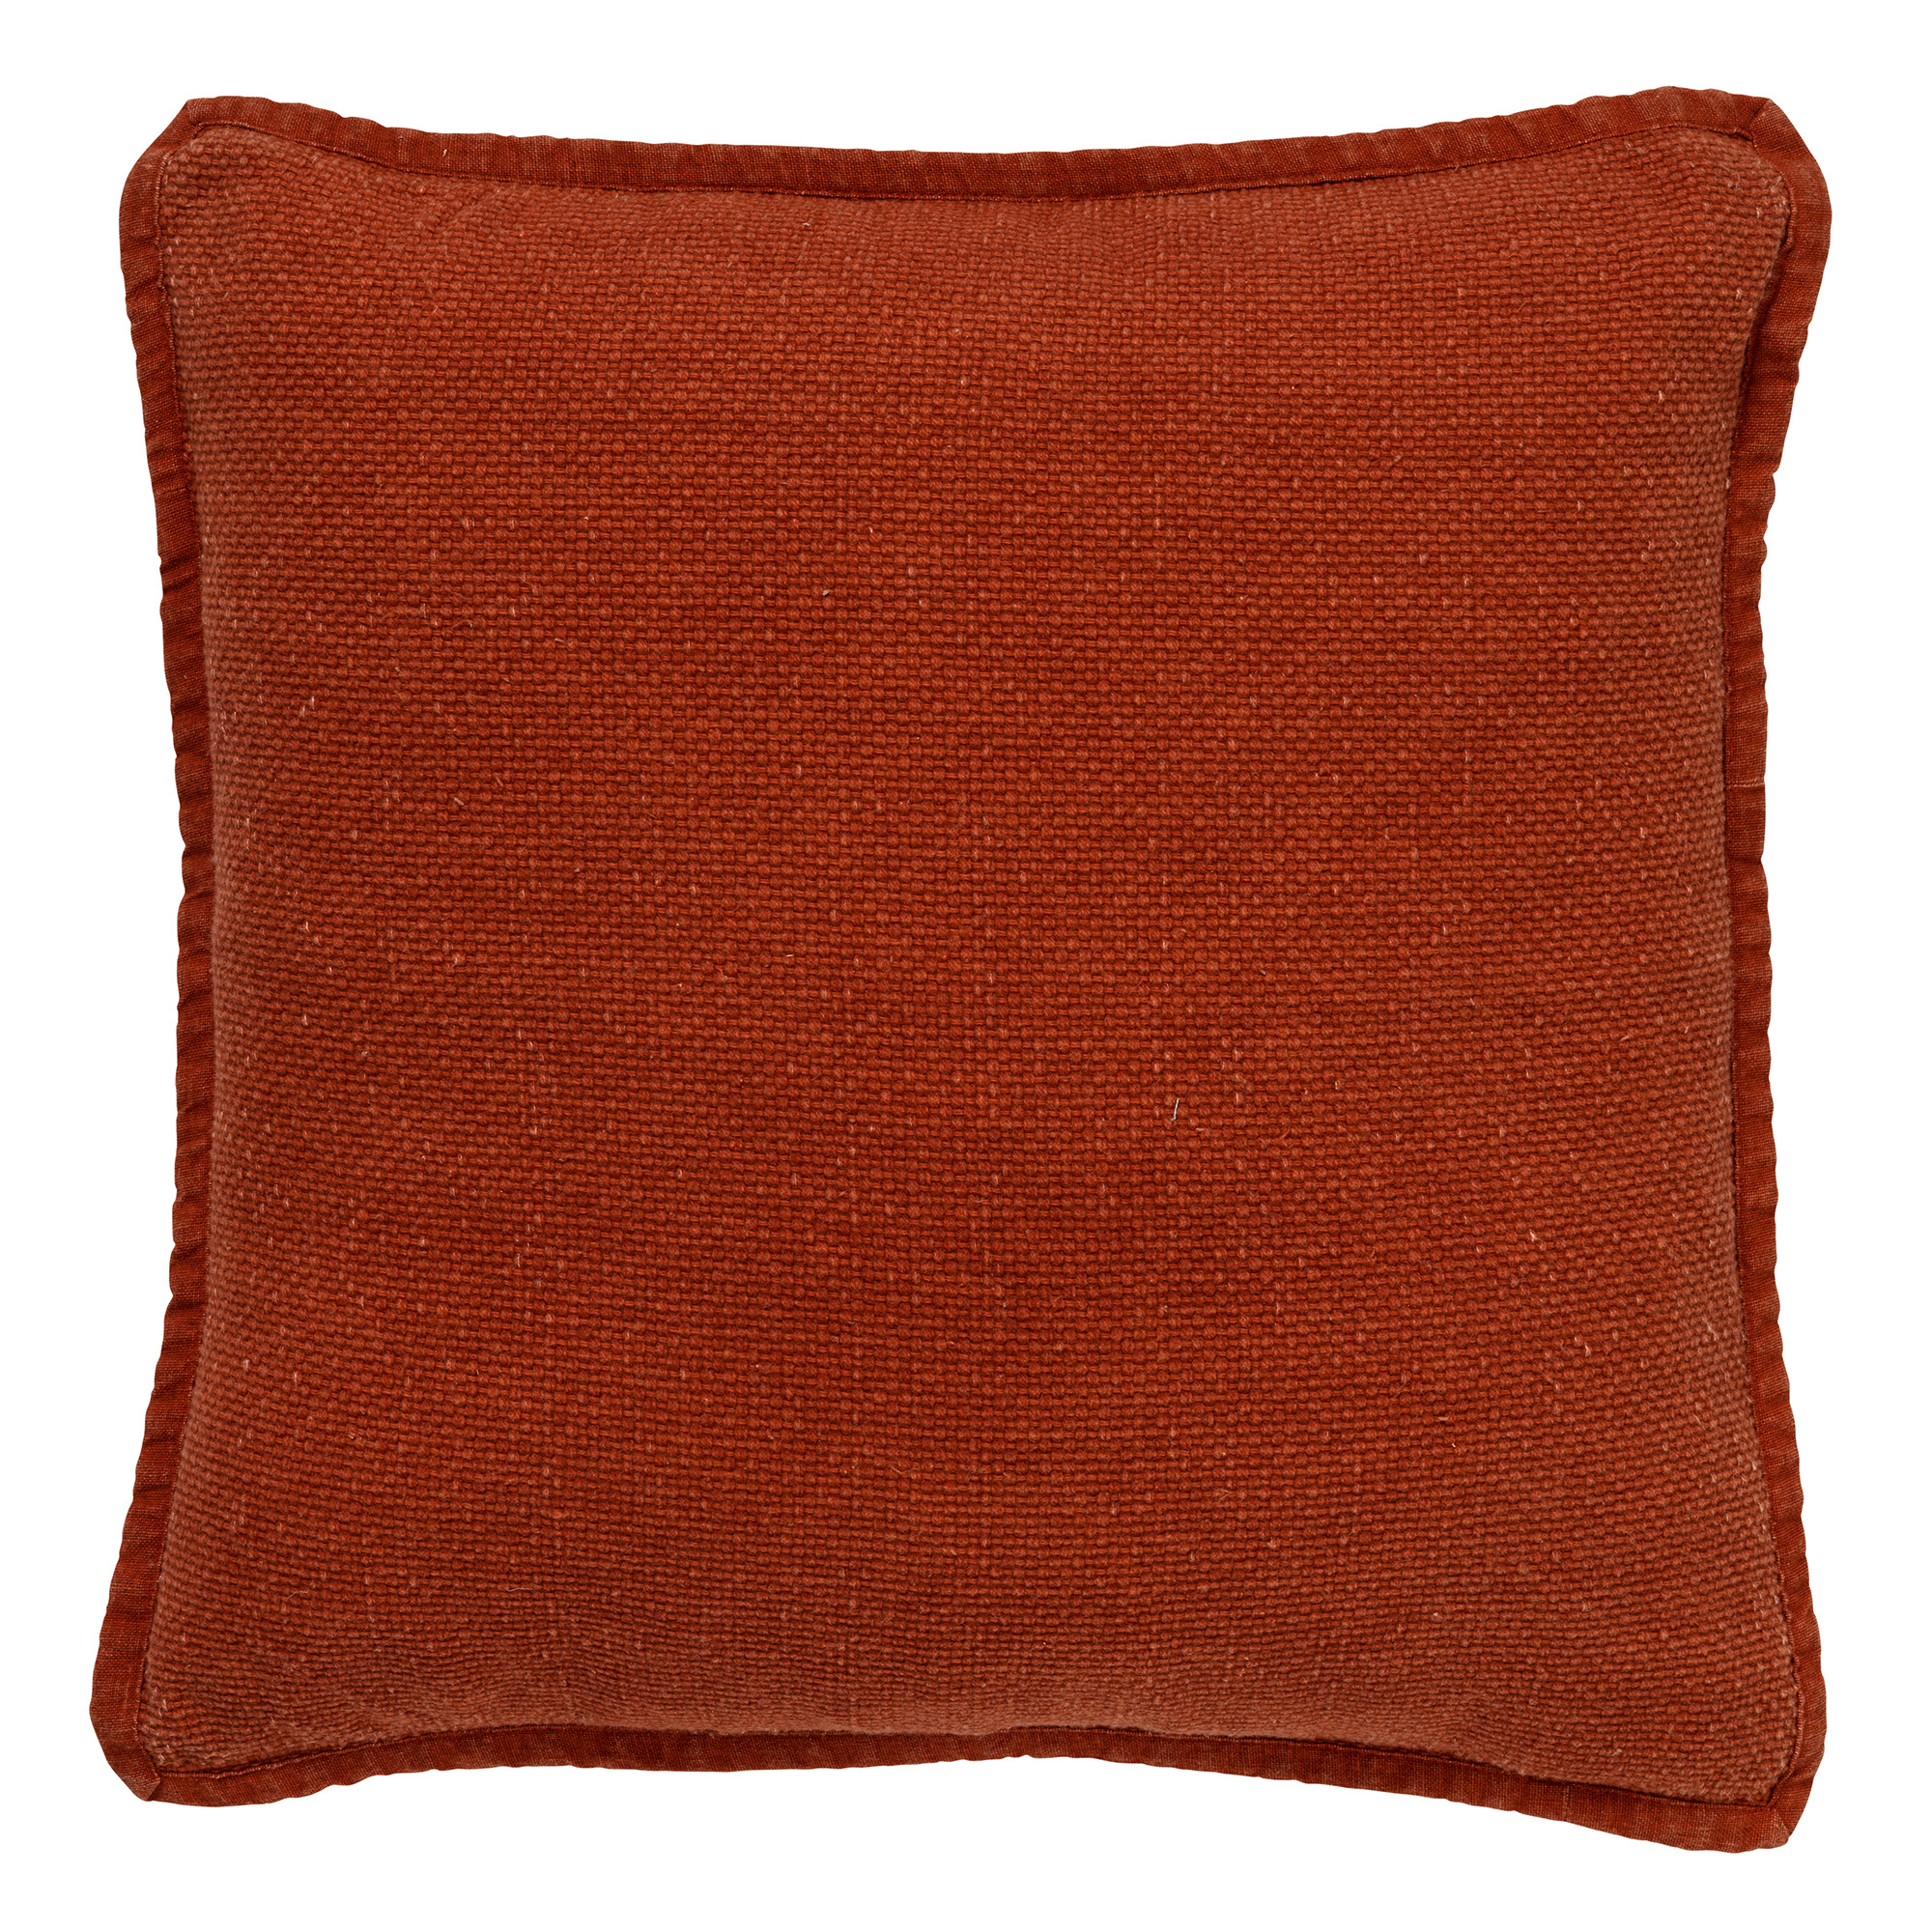 BOWIE - Cushion washed cotton 45x45 cm Potters Clay